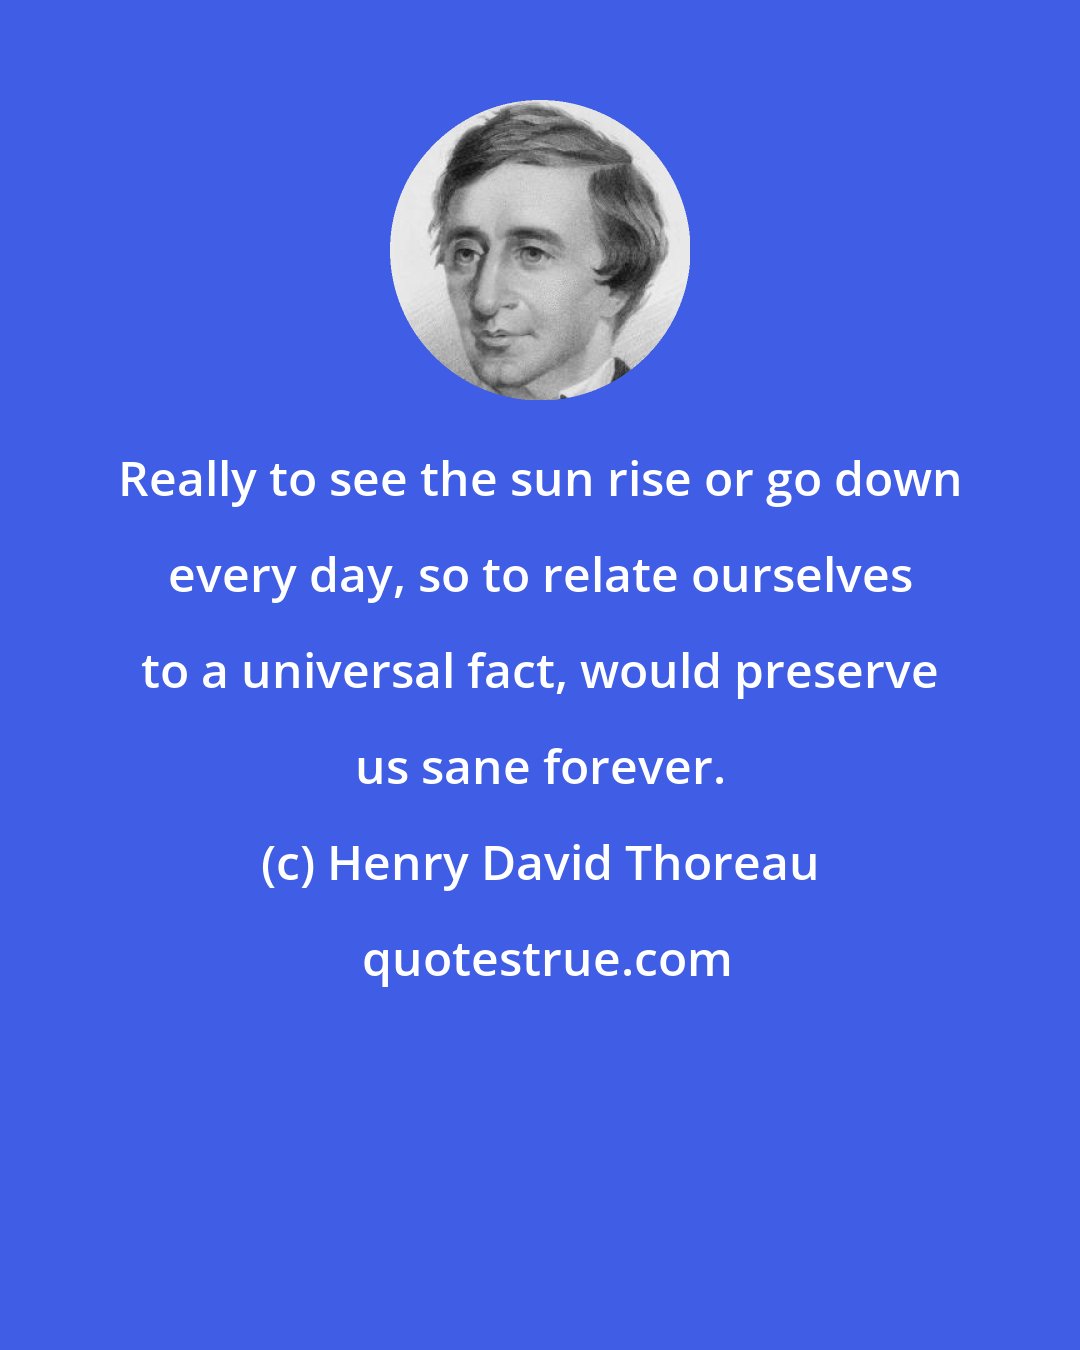 Henry David Thoreau: Really to see the sun rise or go down every day, so to relate ourselves to a universal fact, would preserve us sane forever.